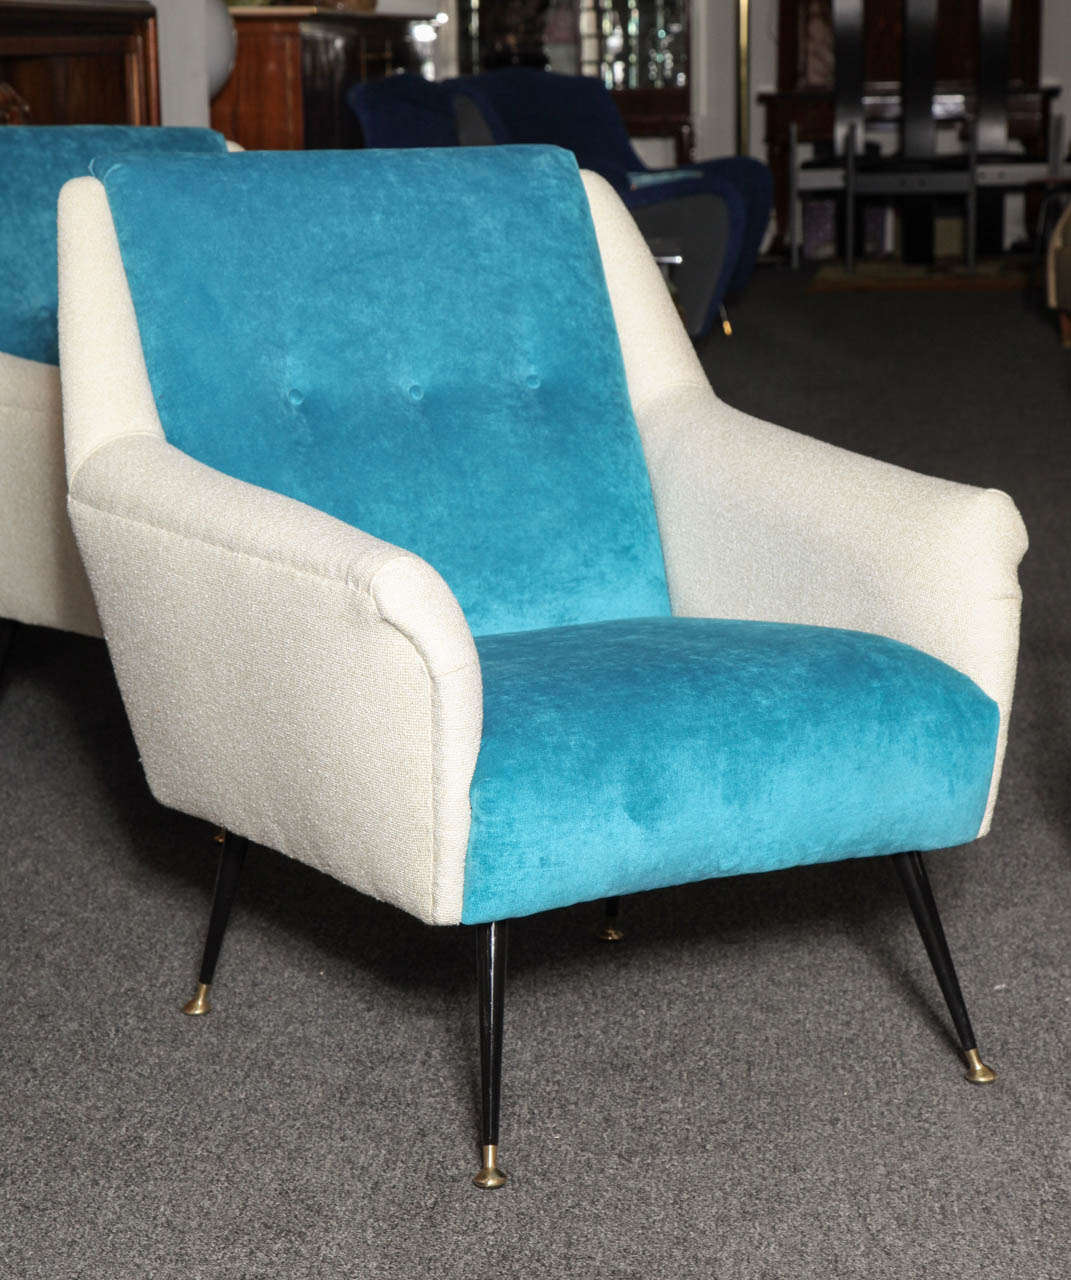 Mid-Century Modern Pair of Armchairs by Gio Ponti Made in Milan, 1955 For Sale